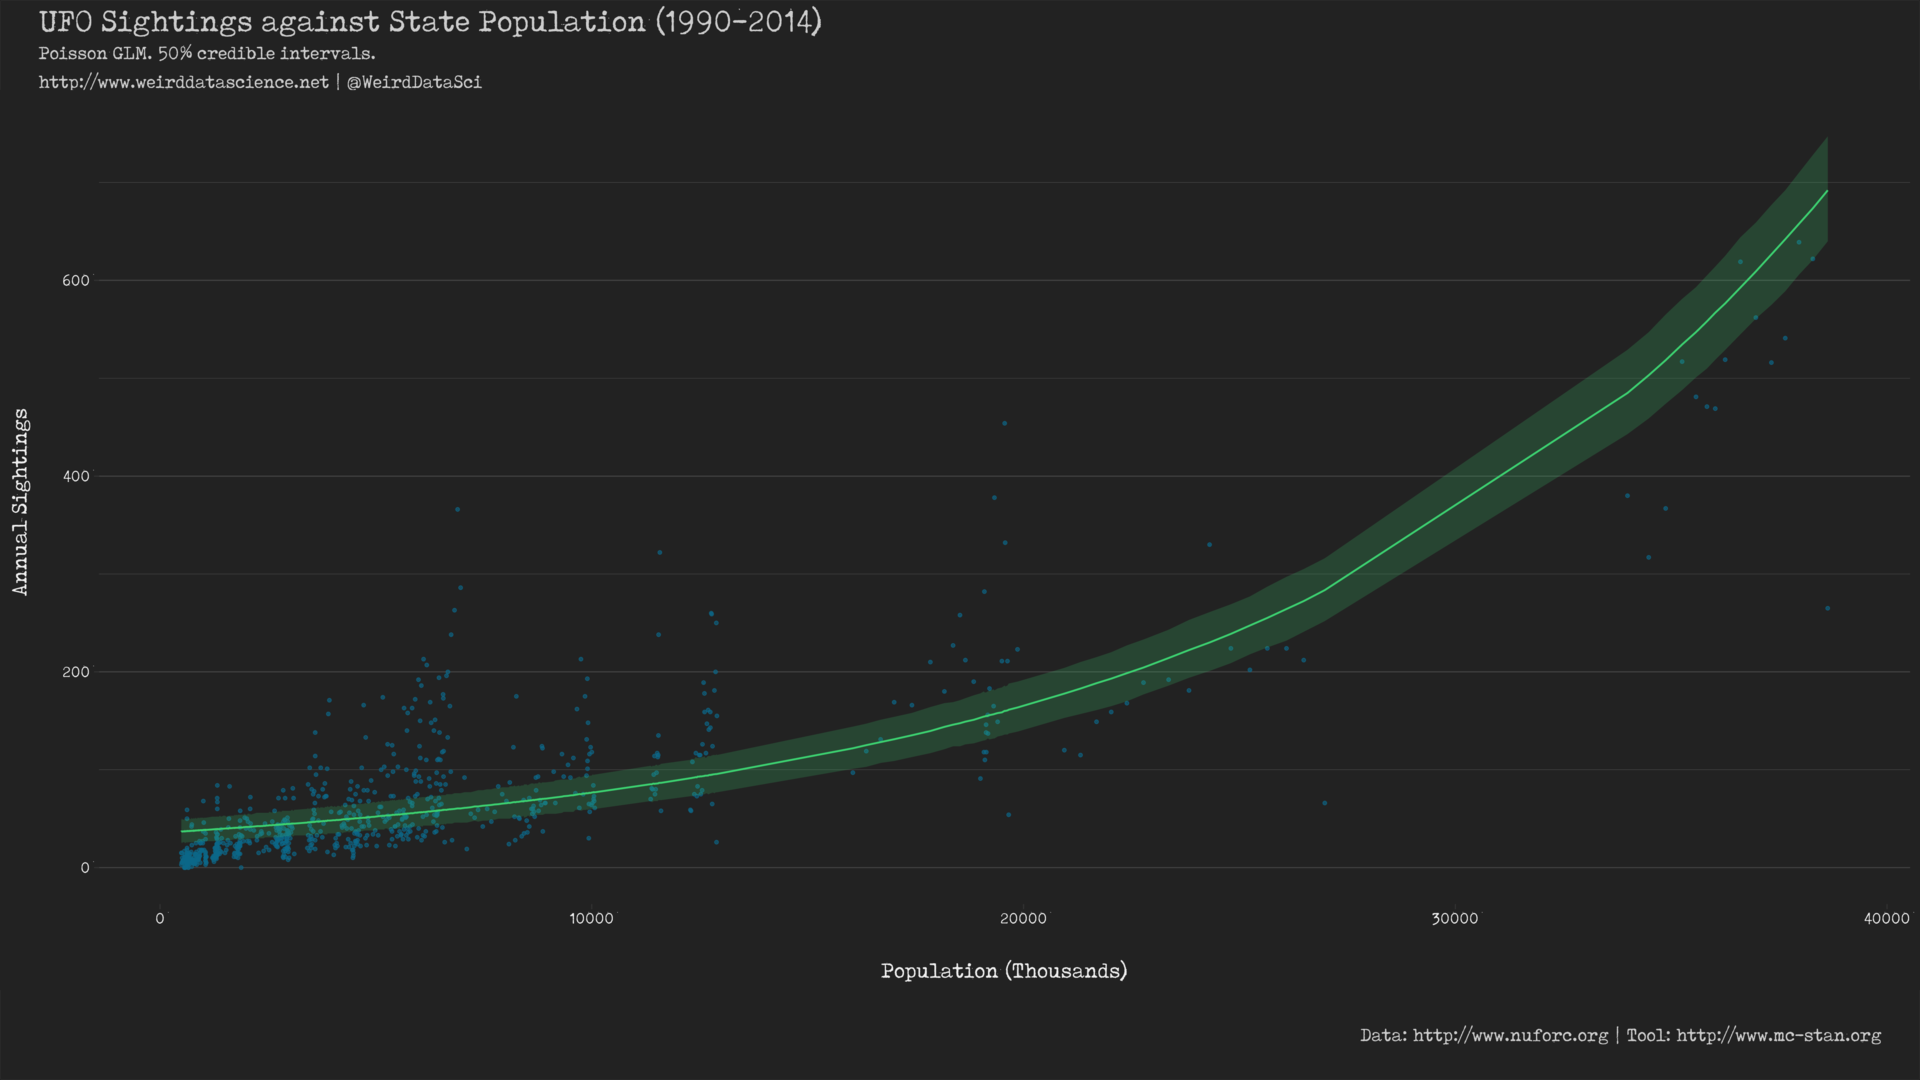 Global poisson GLM of UFO sightings against population.